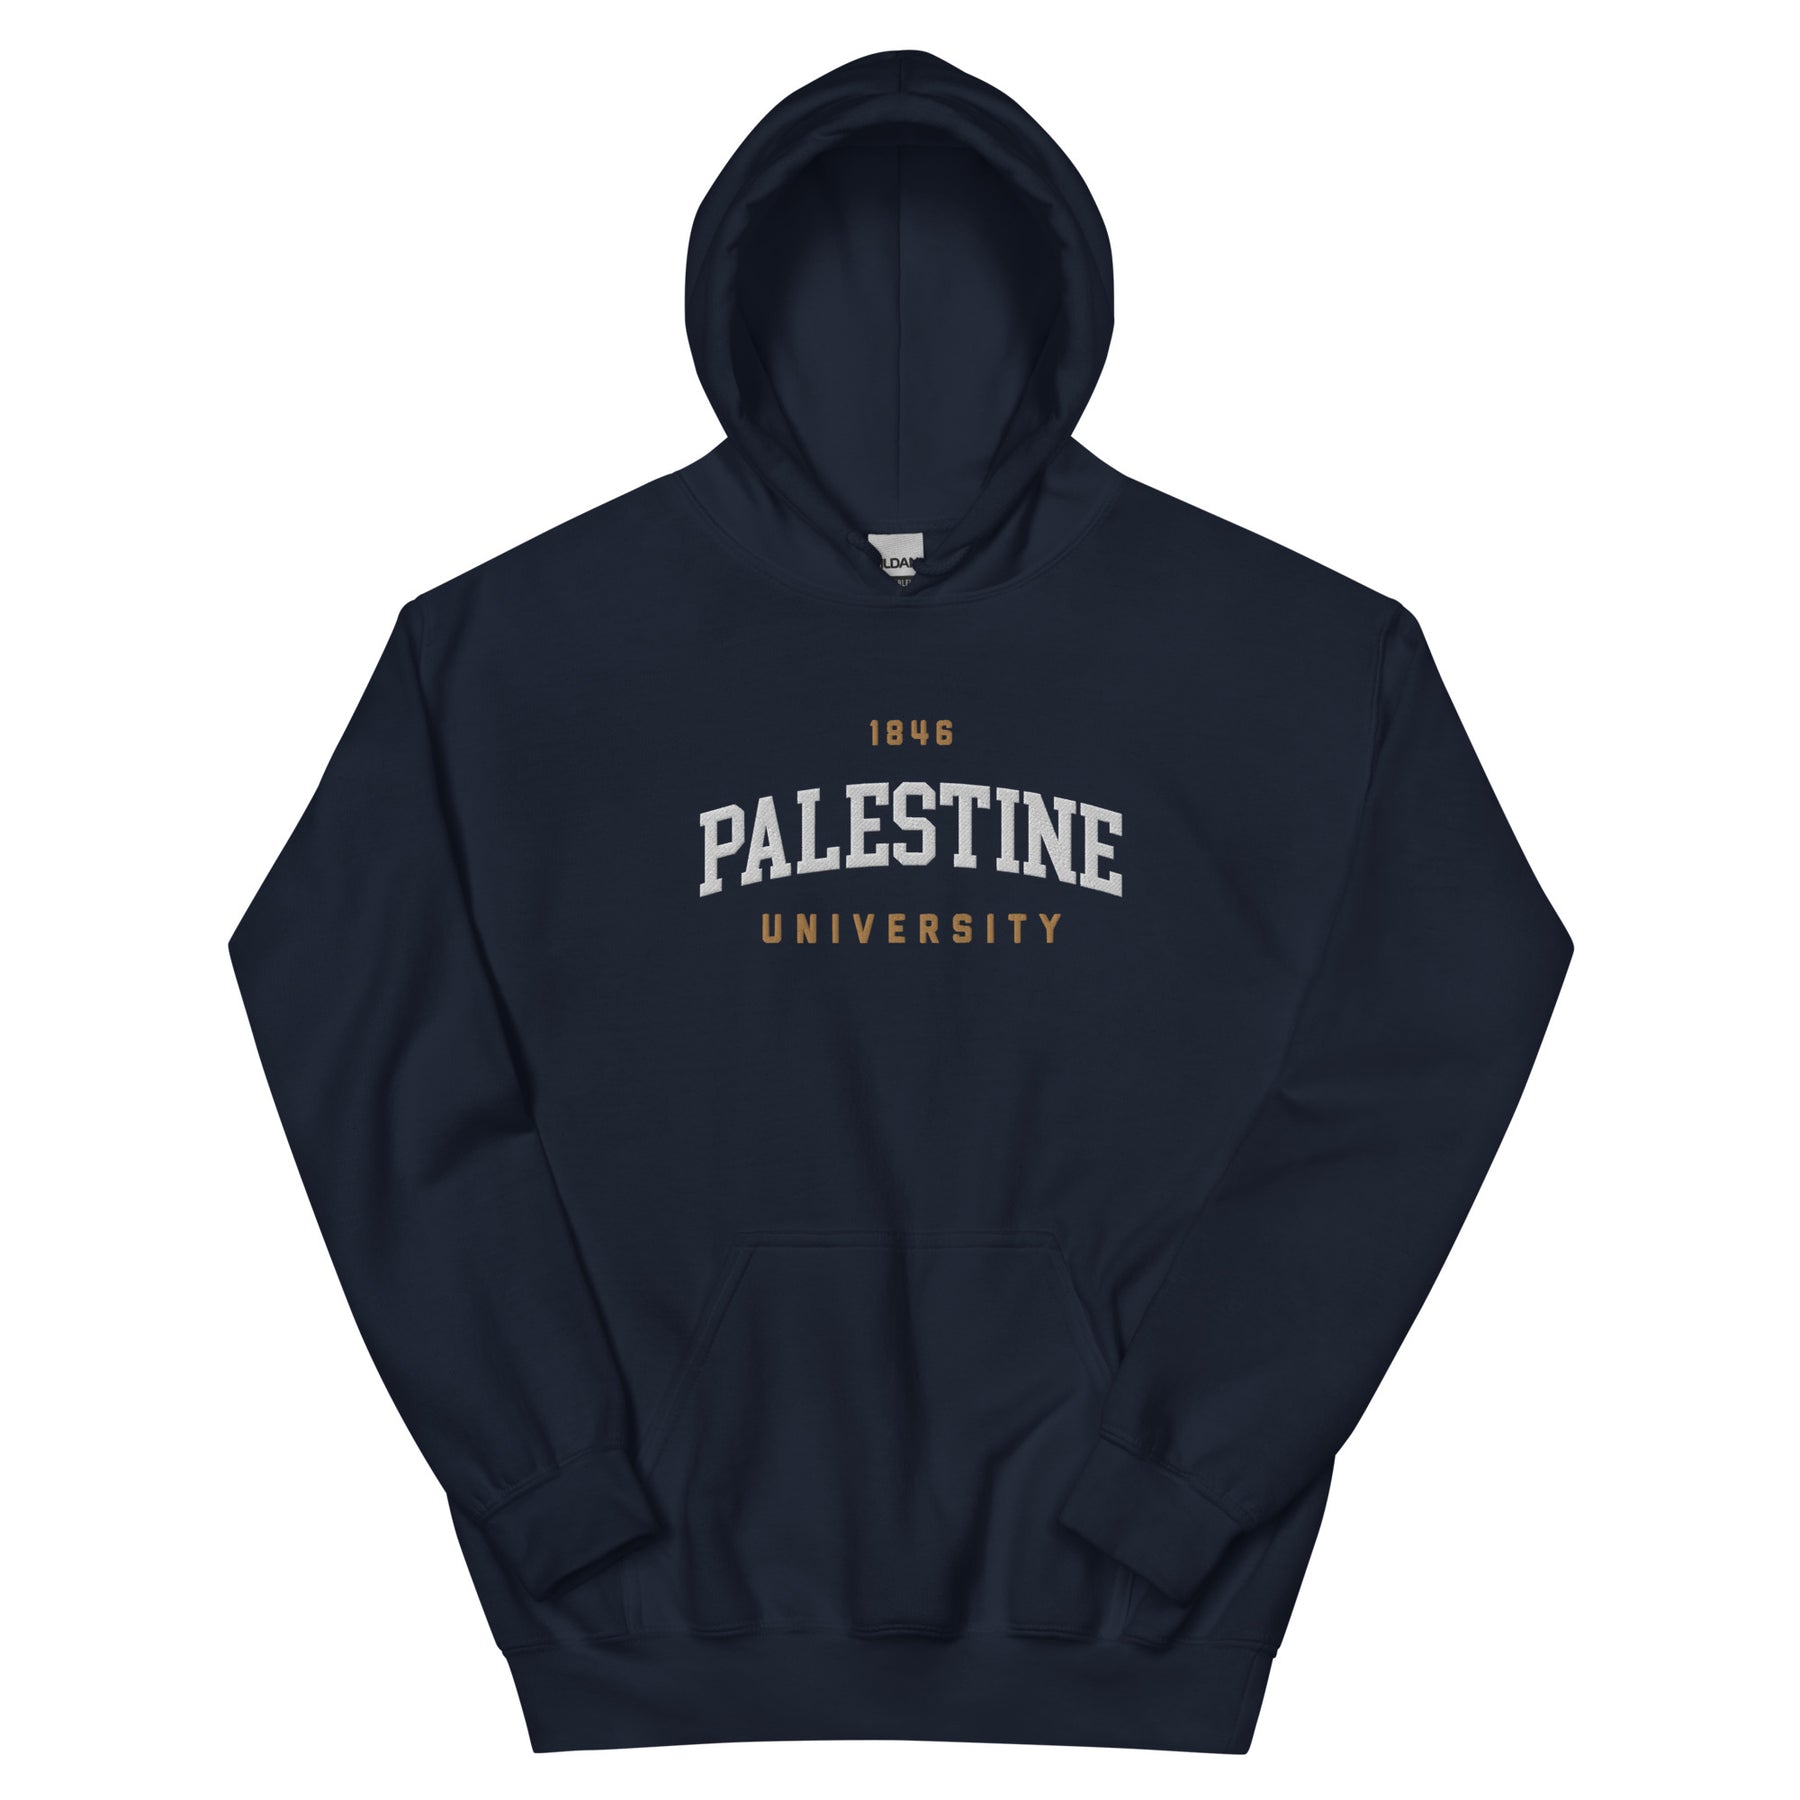 Palestine University 1846 hoodie in navy by Dar Collective